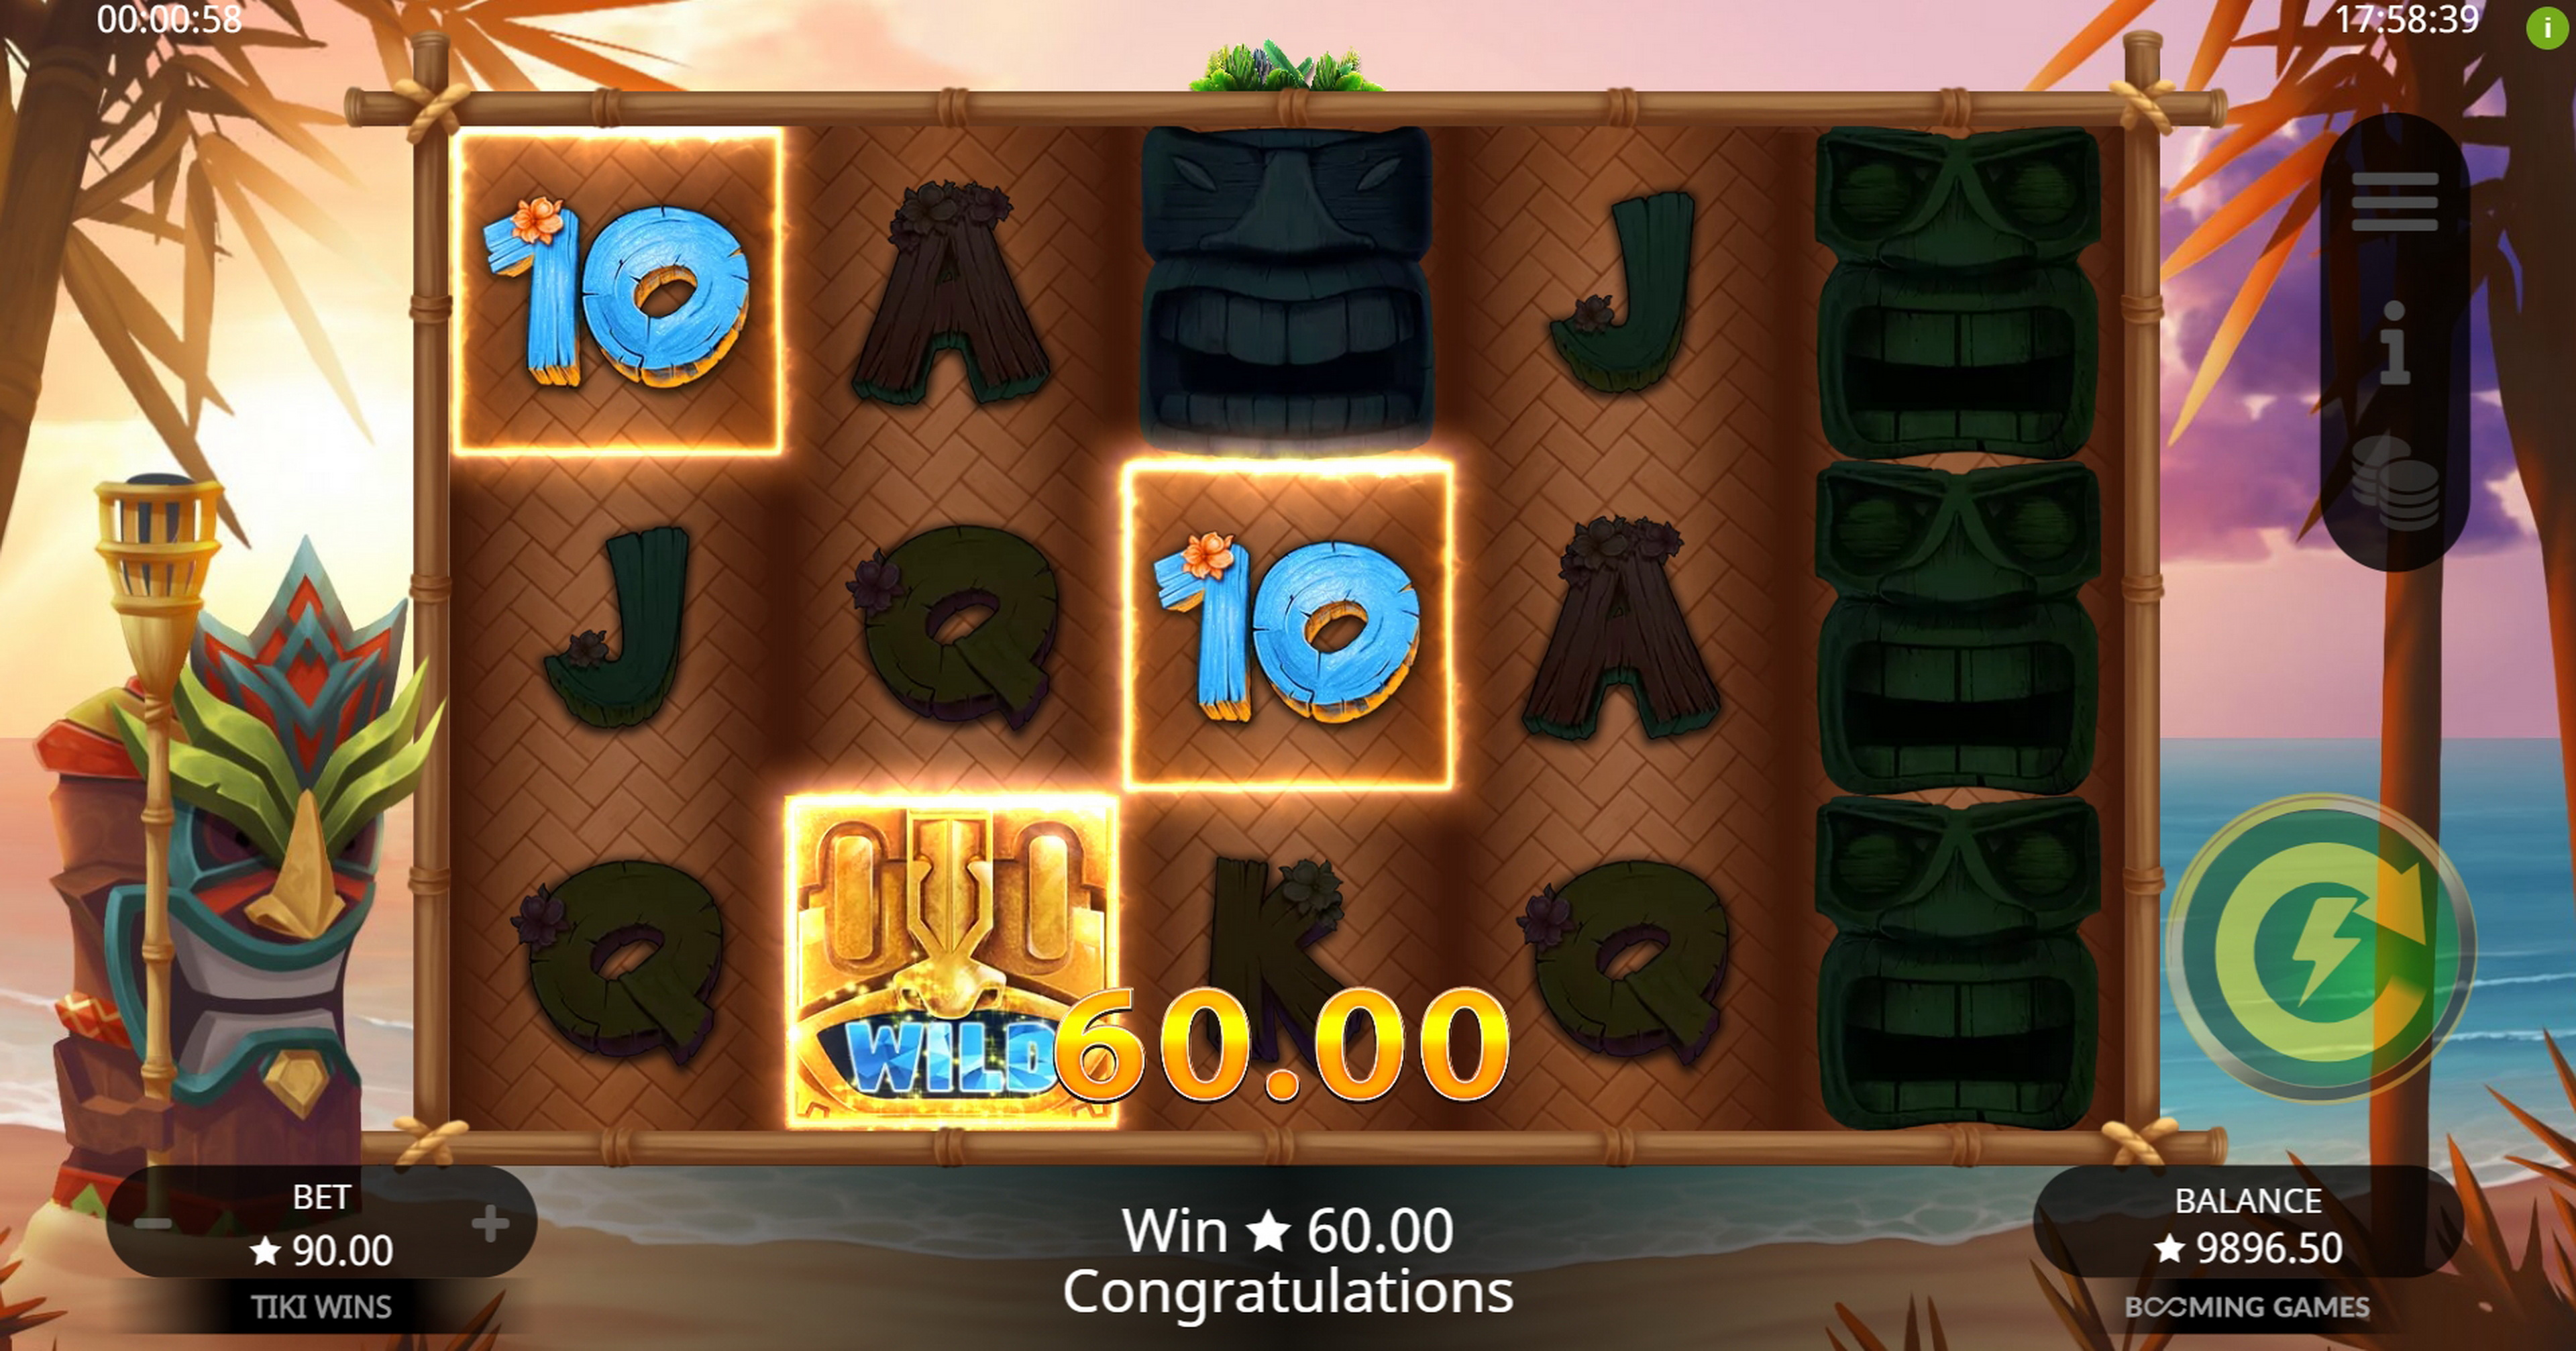 Win Money in Tiki Wins Free Slot Game by Booming Games